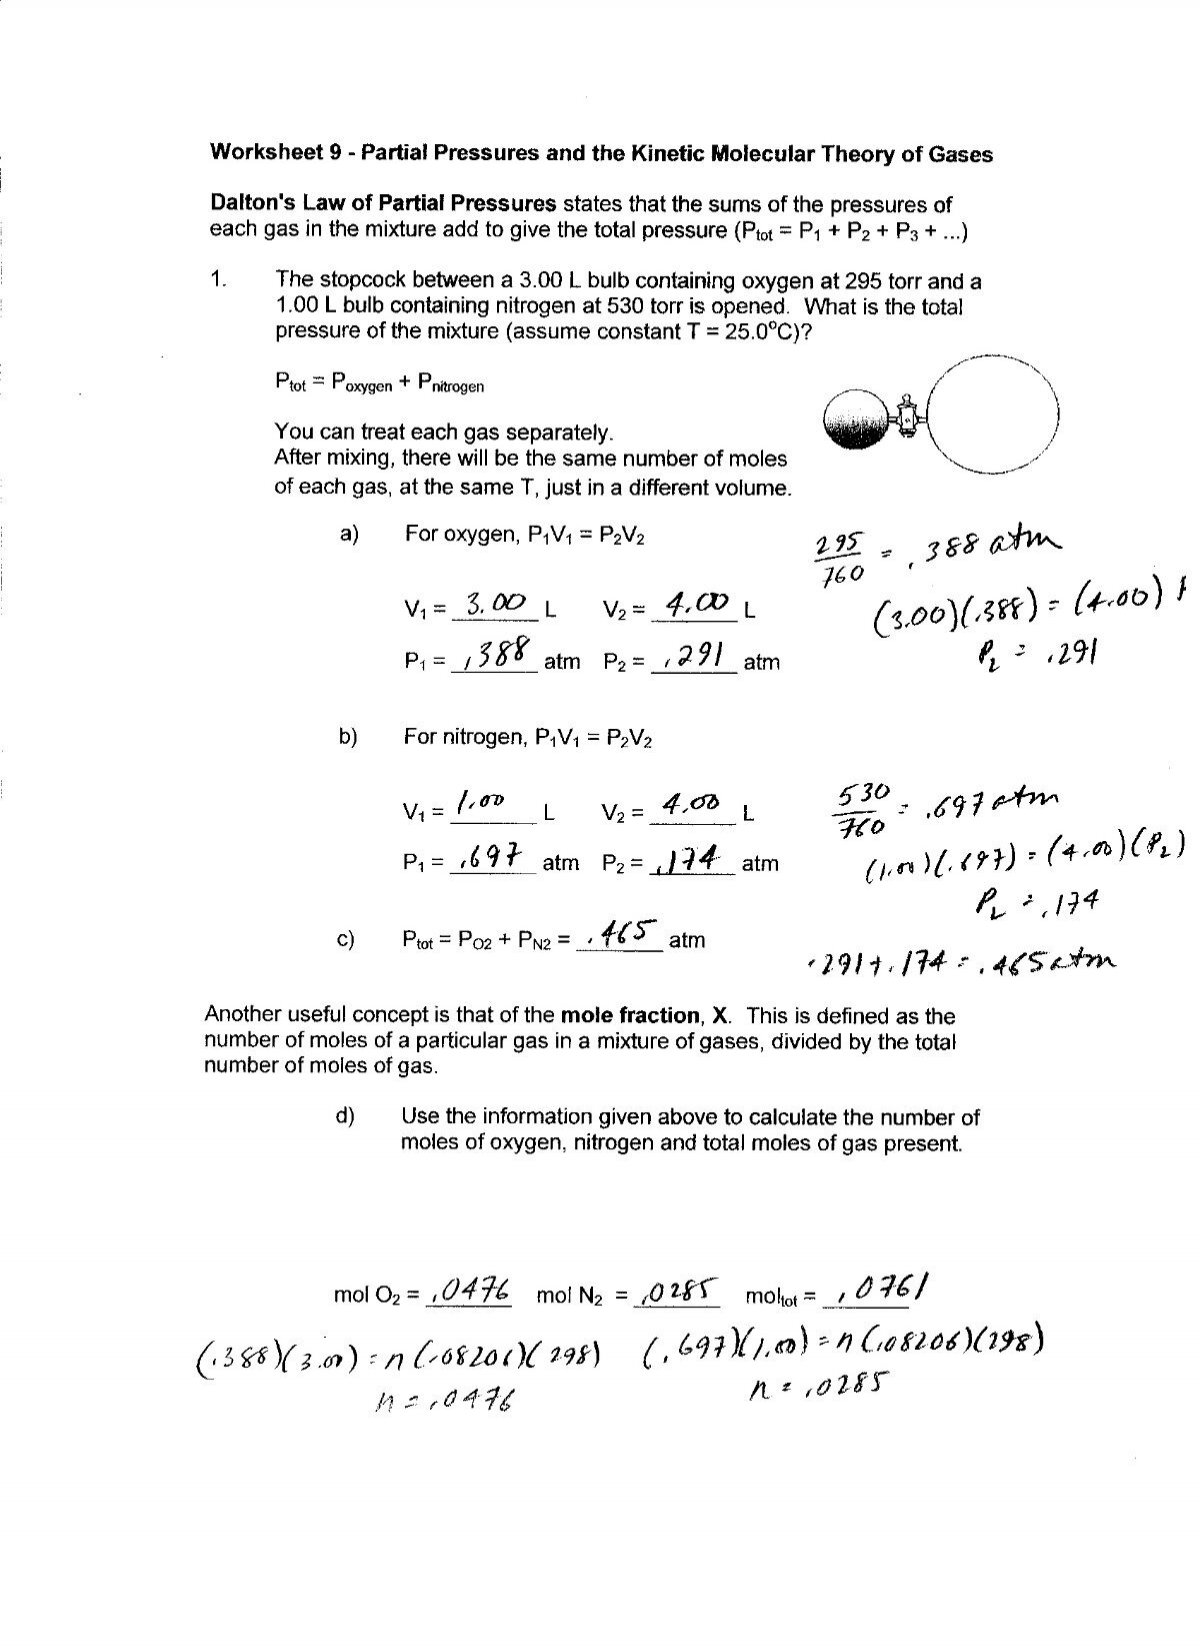 worksheet-9-partial-pressures-and-the-kinetic-molecular-theory-of